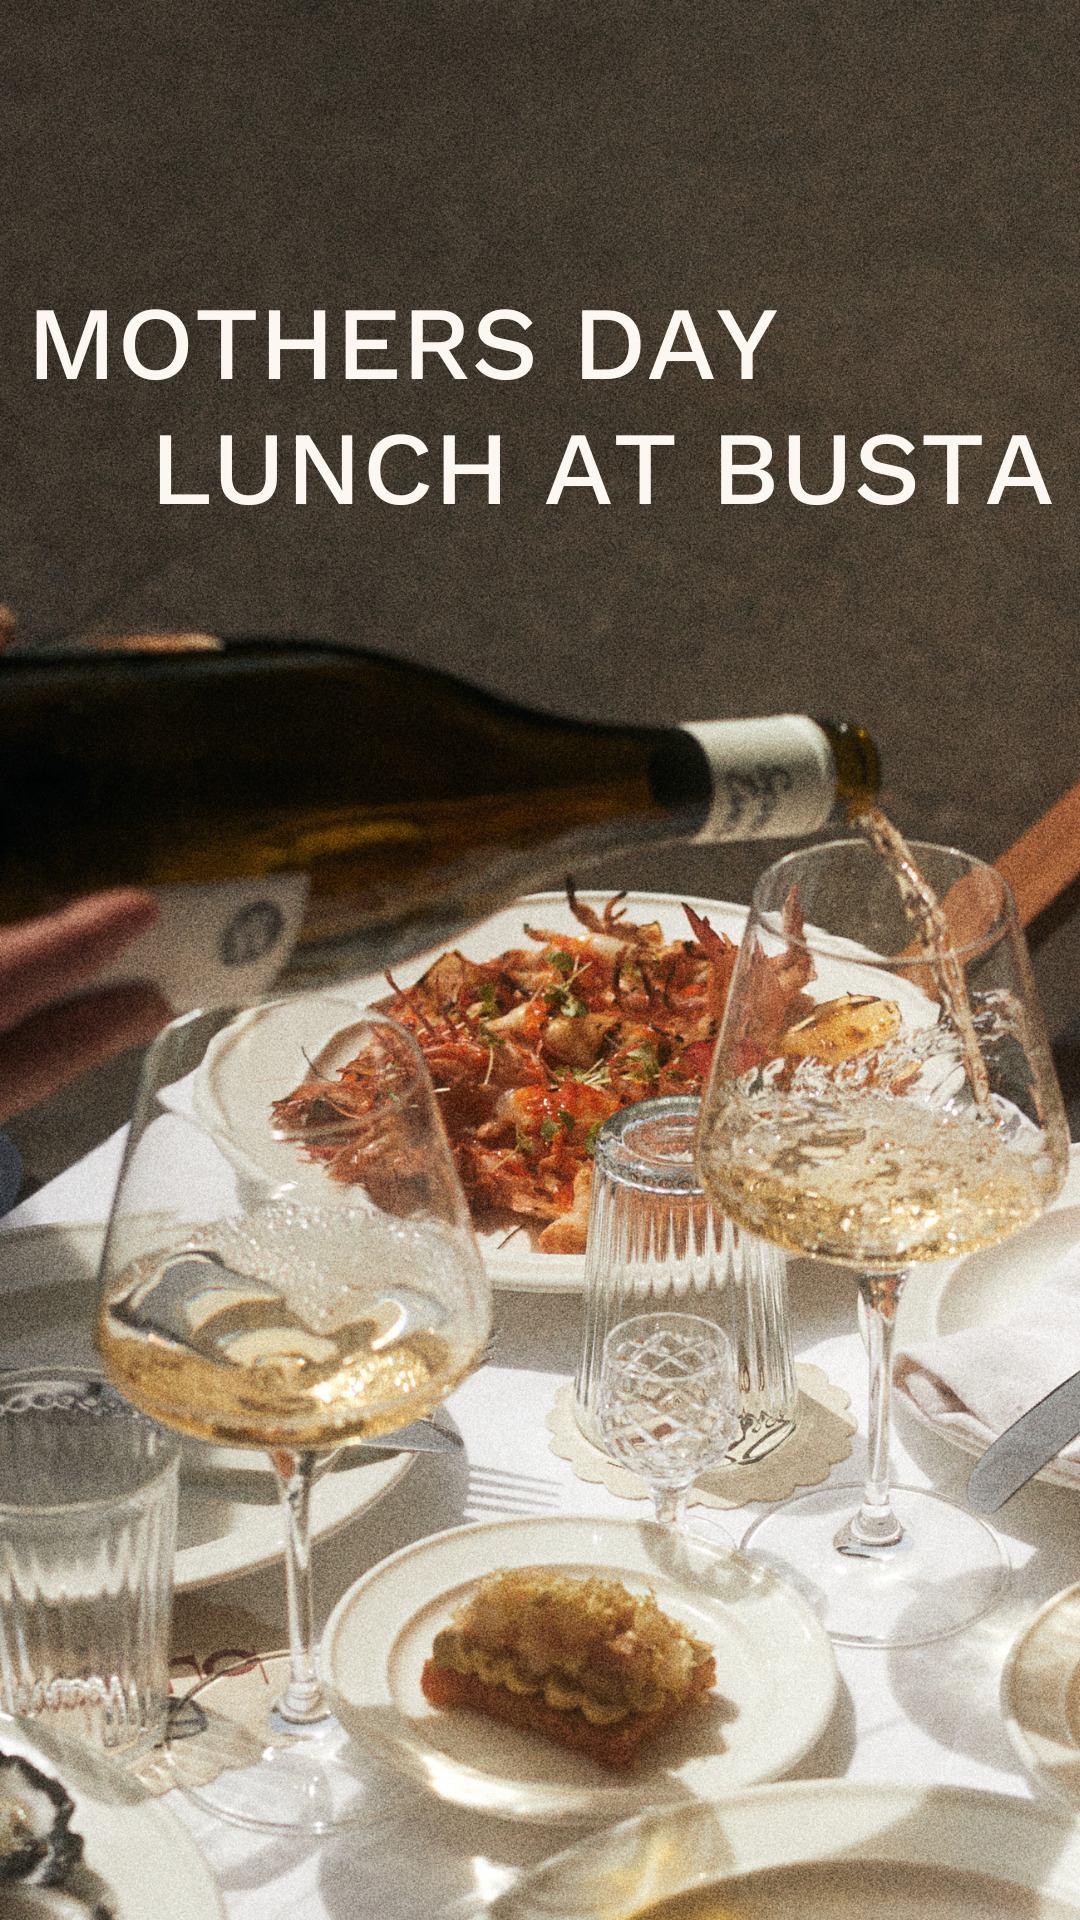 Mothers Day lunch at Busta